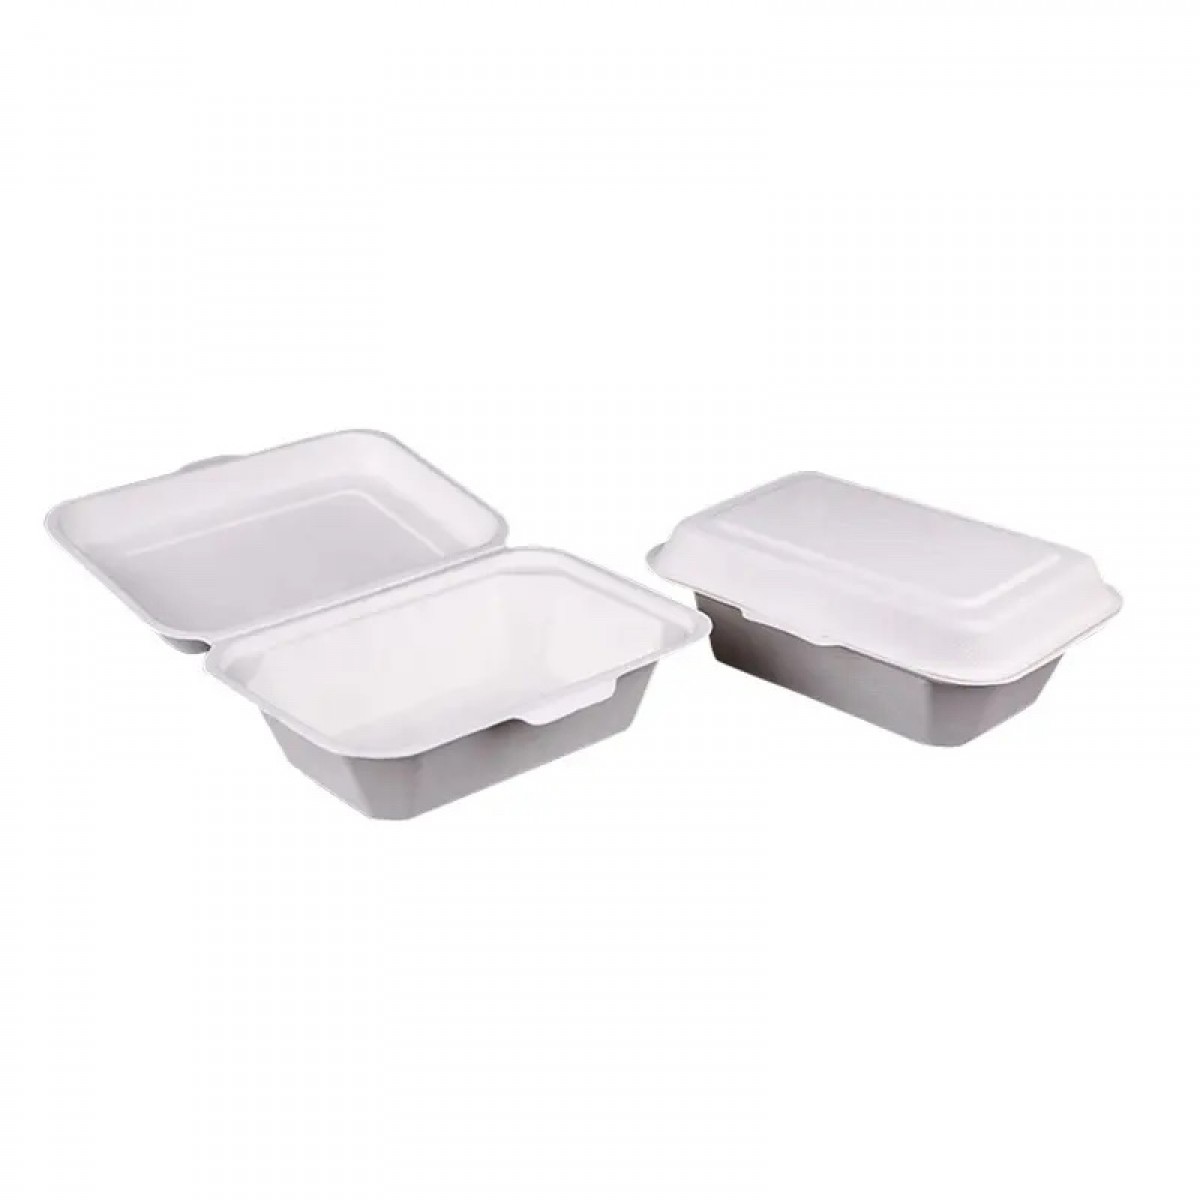 To Go Soup Containers 8oz Gourmet Food Cup (96mm) - 1000 ct, Coffee Shop  Supplies, Carry Out Containers